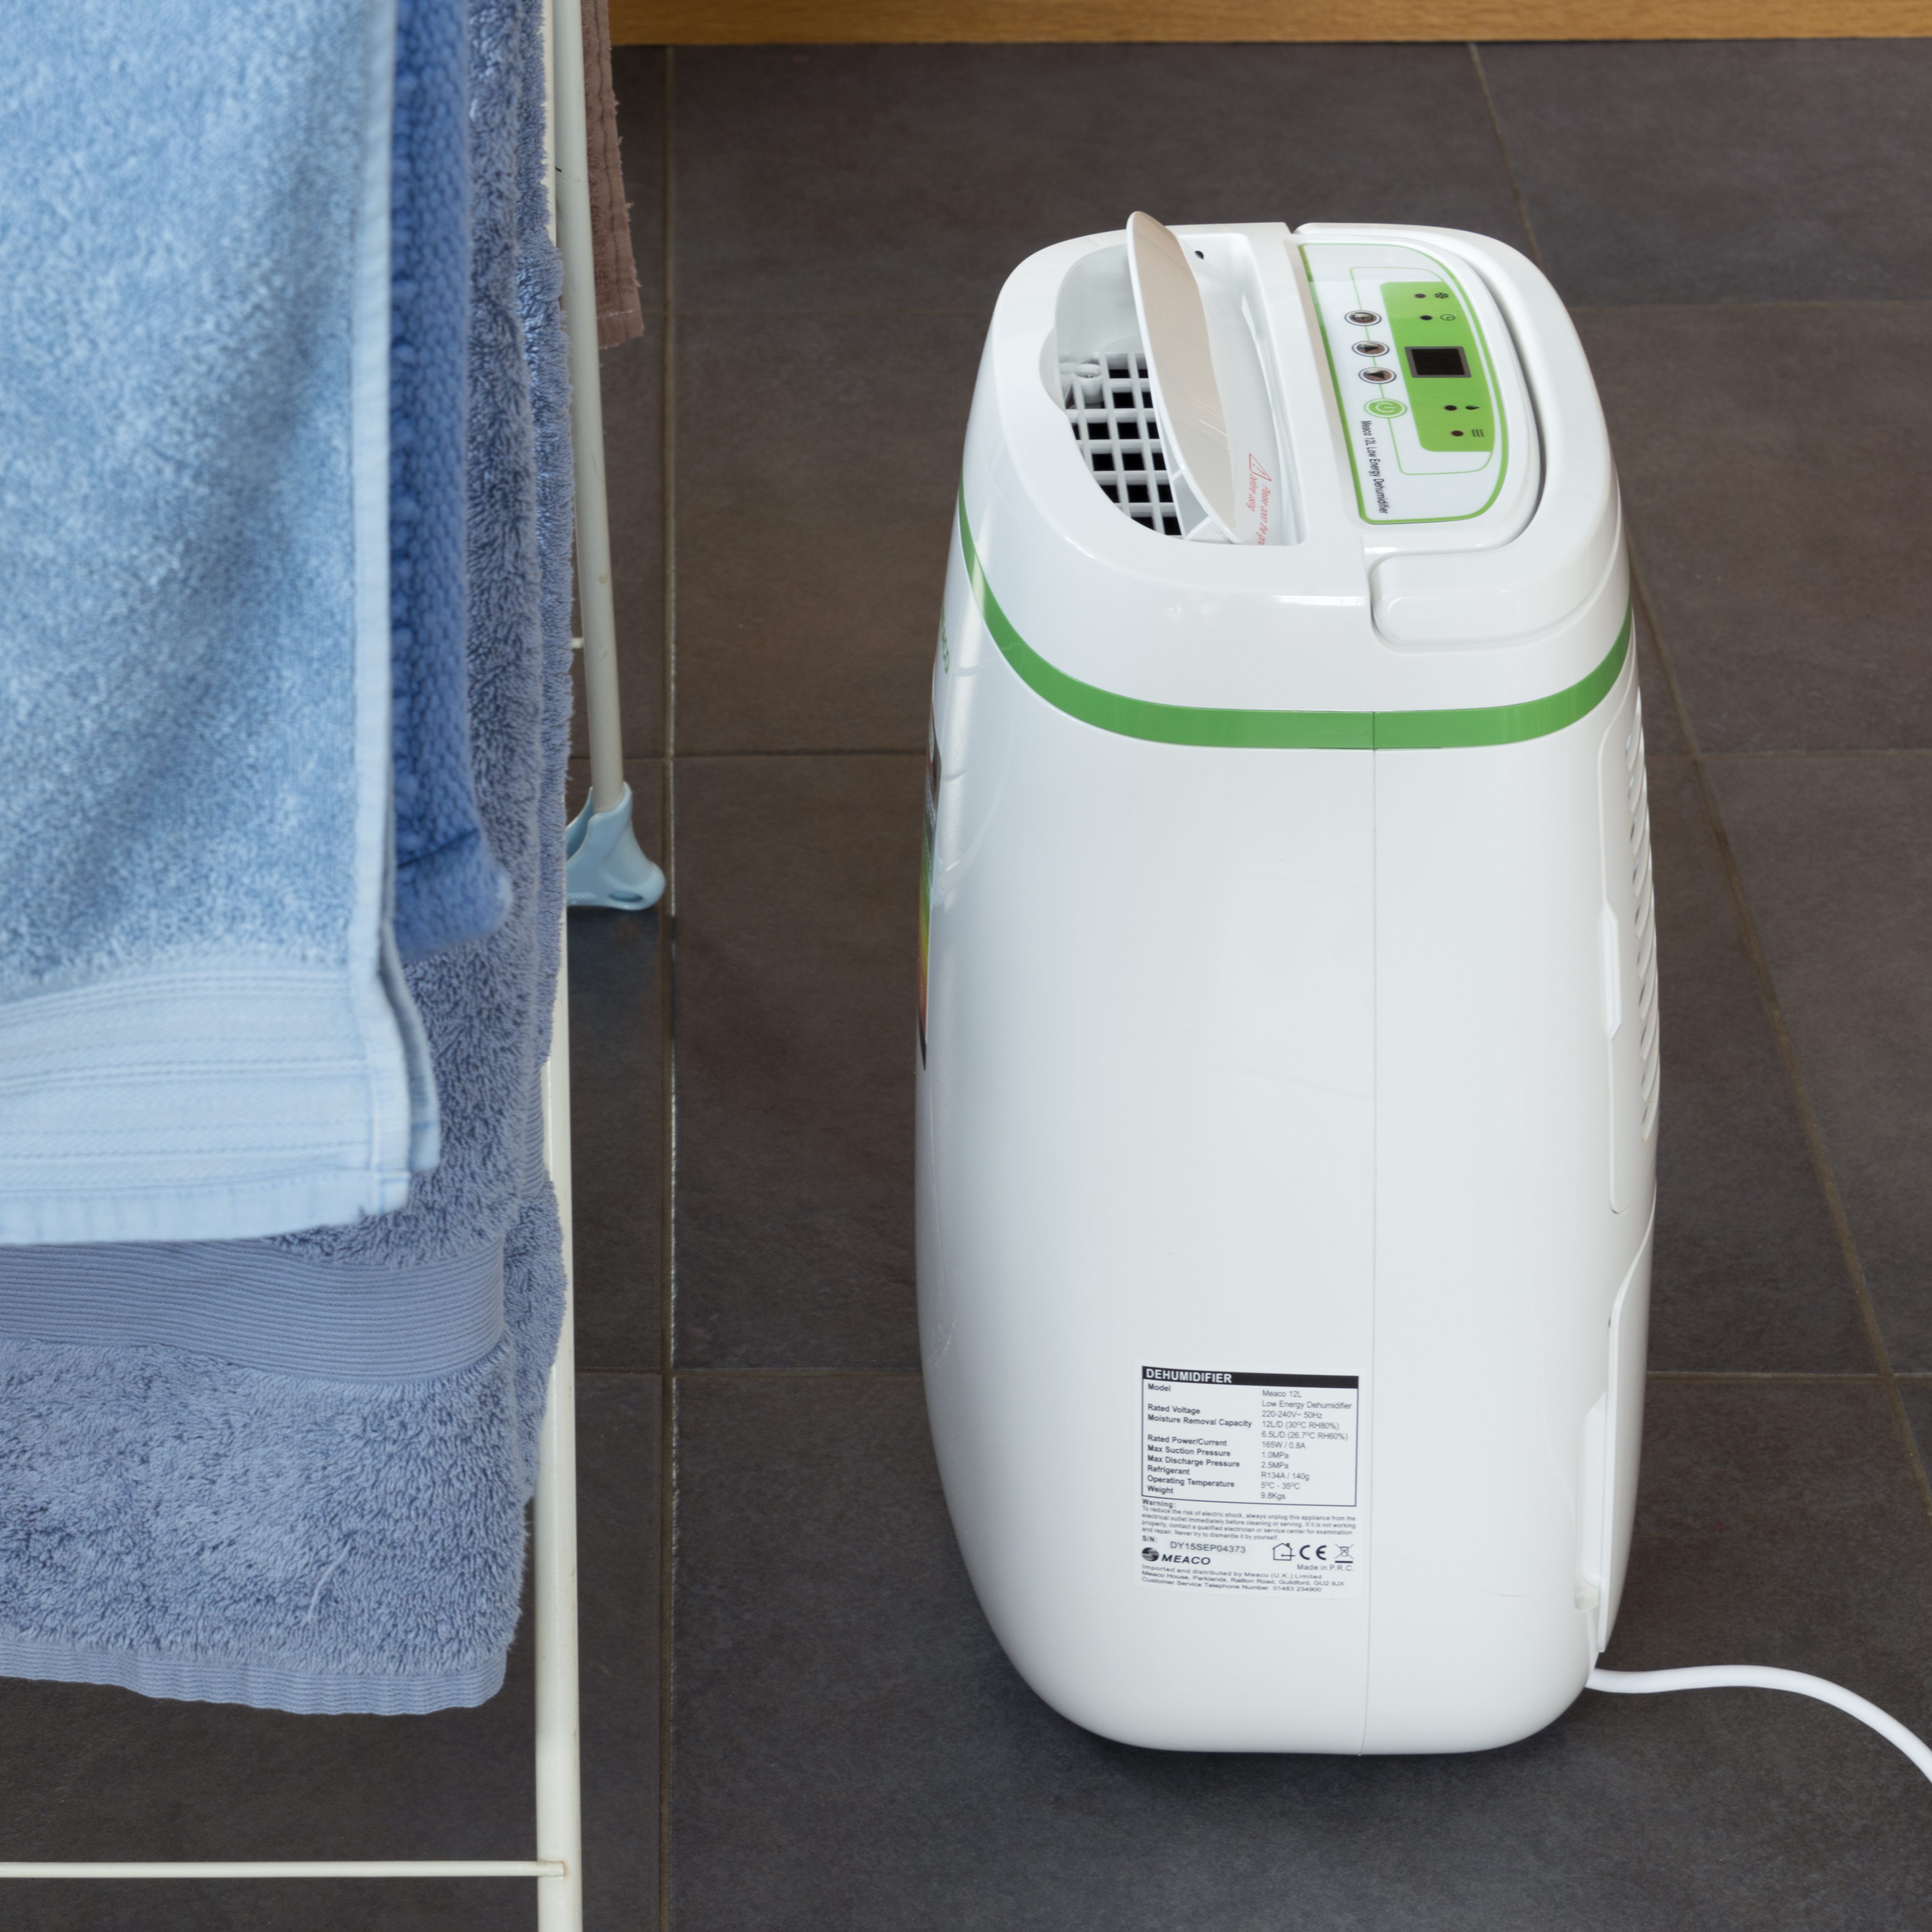 Are Dehumidifiers Good For Drying Clothes - Repair Aid